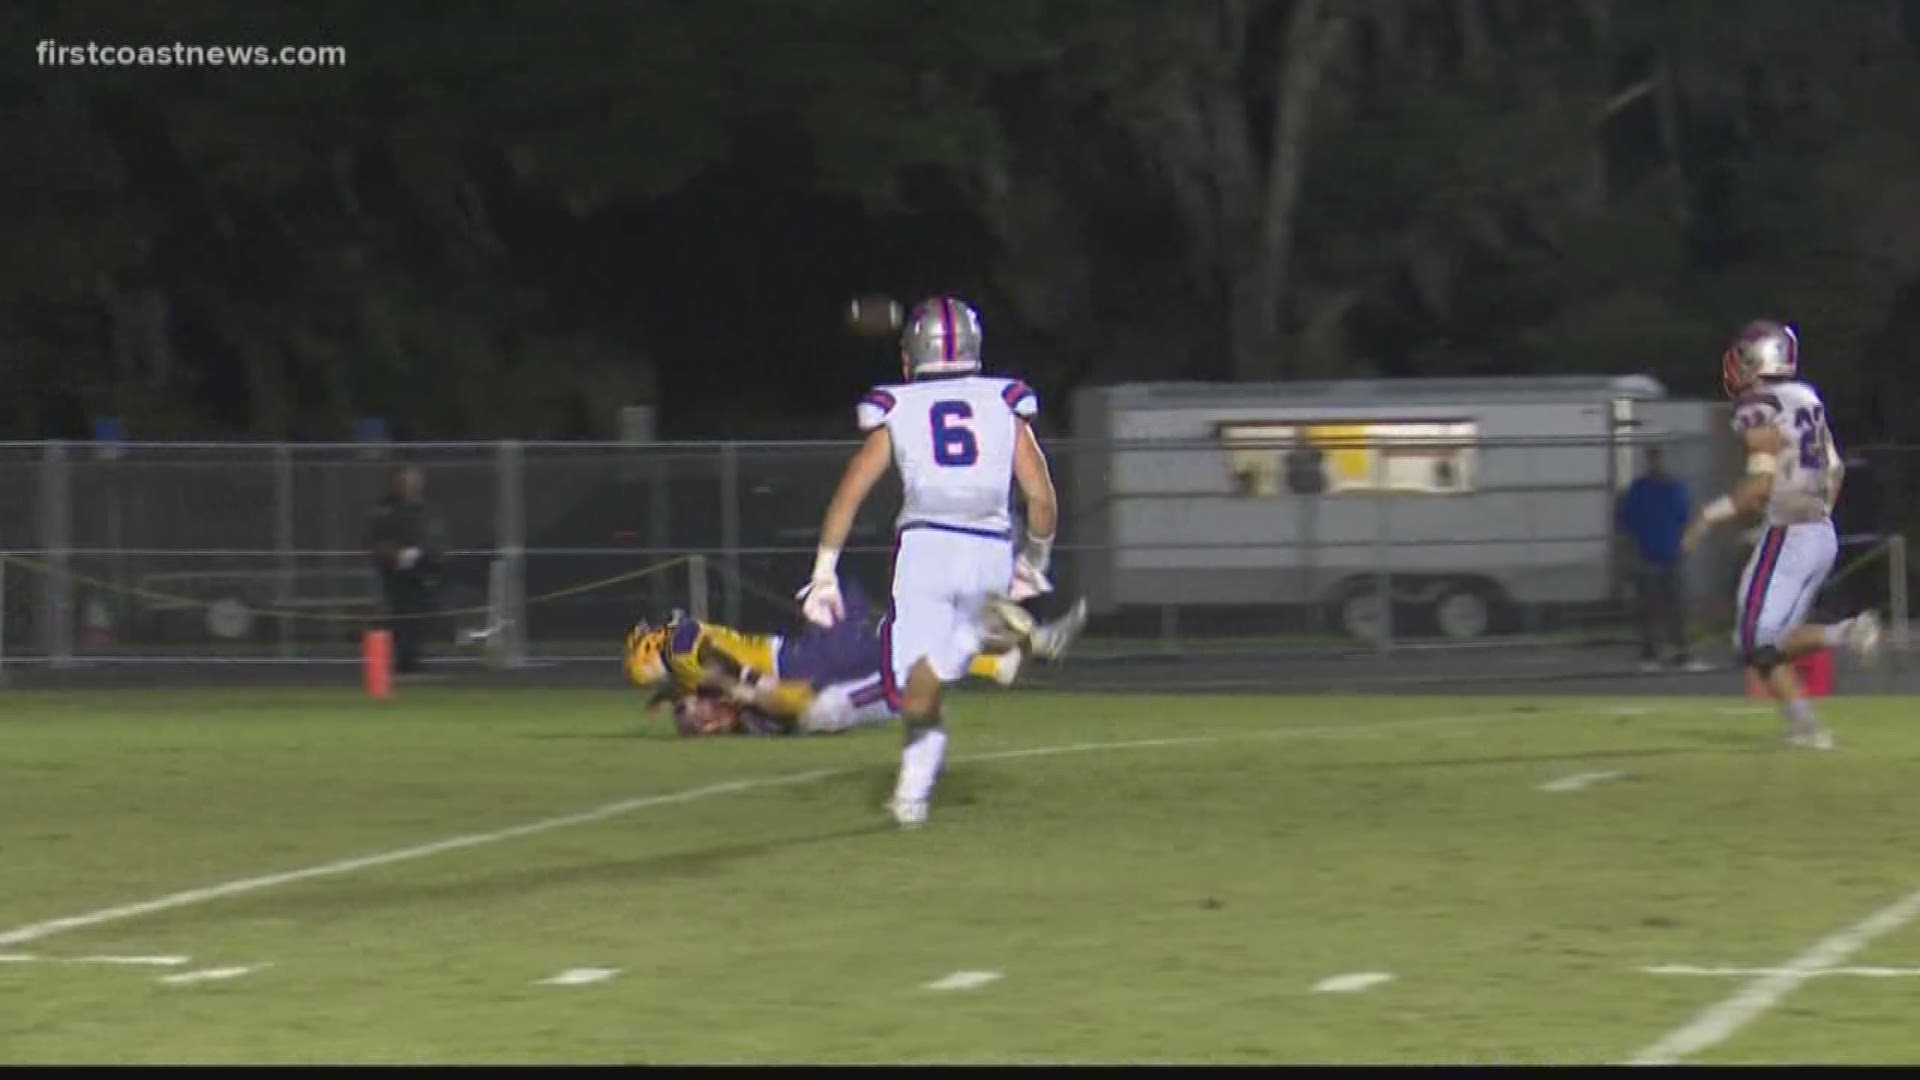 SIDELINE 2018: Week 11 high school football highlights featuring play and hit of the week.